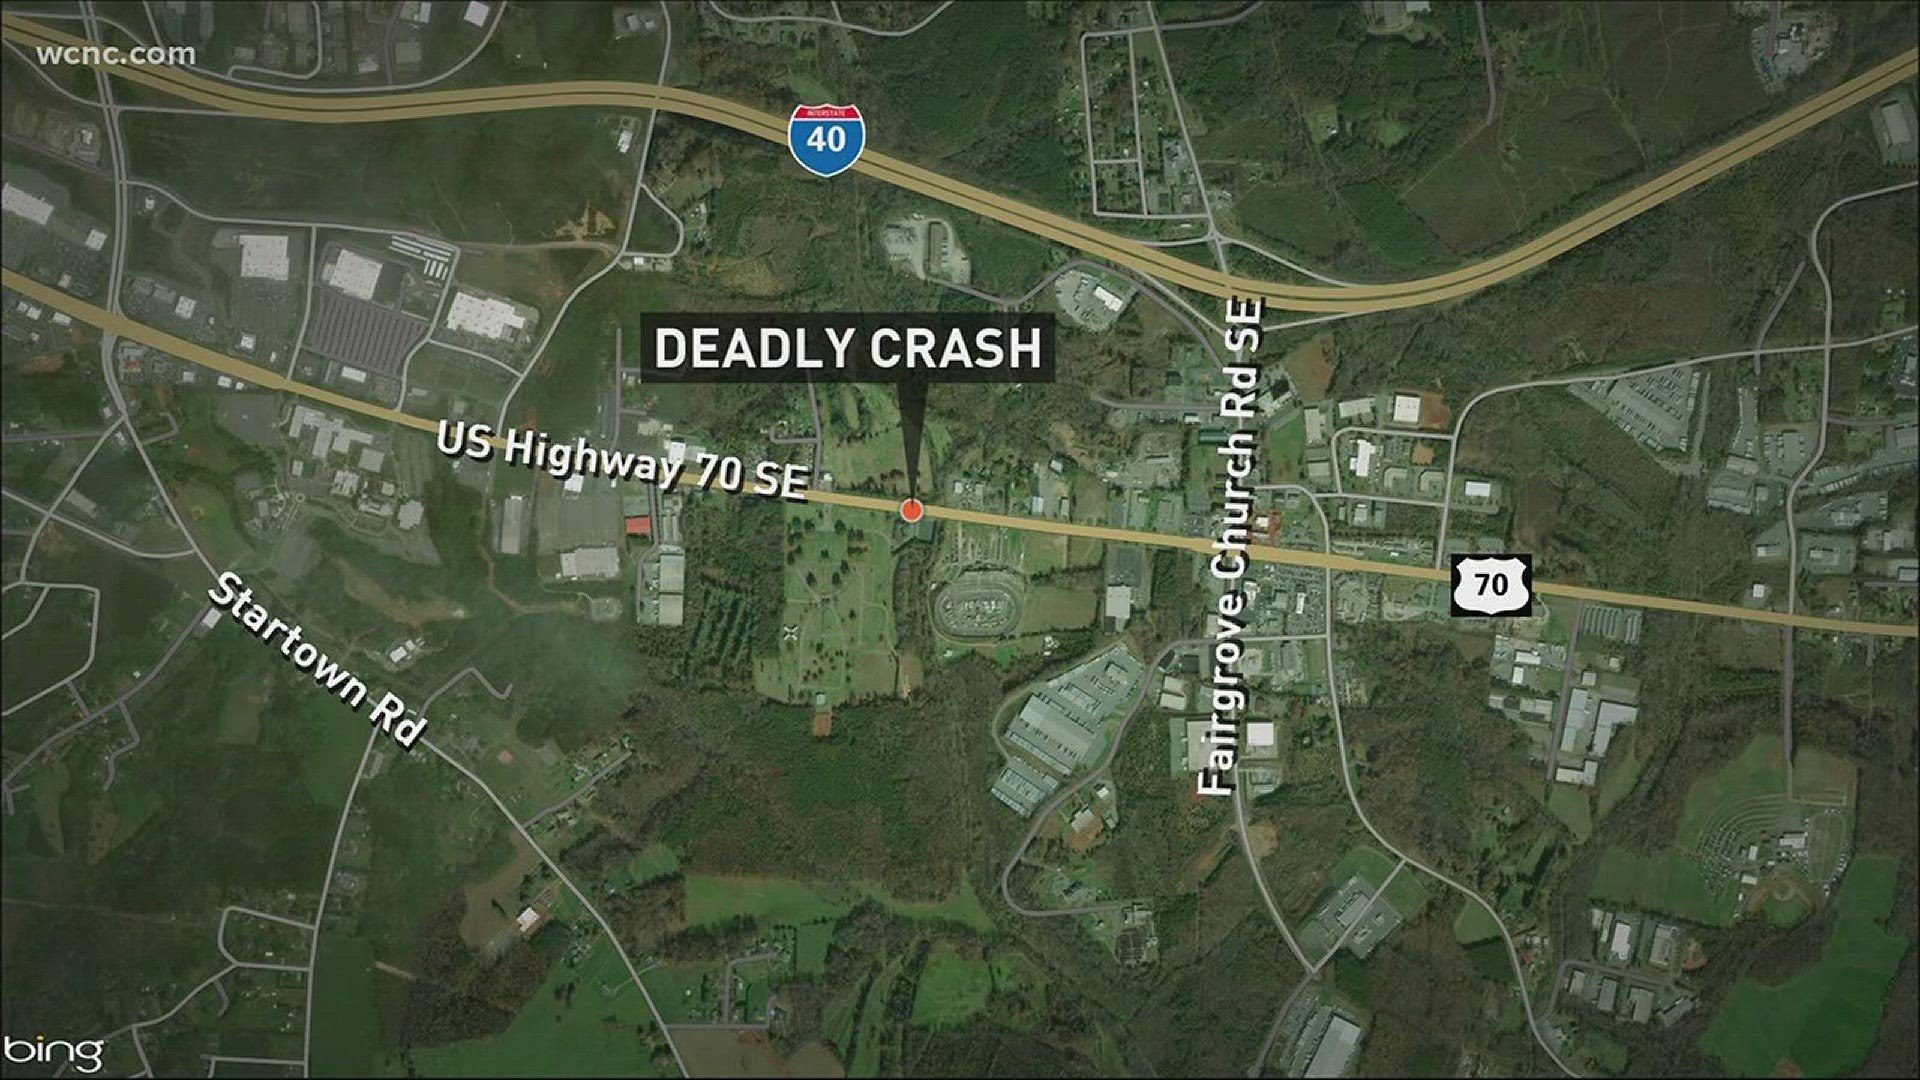 Police are investigating a deadly crash in Hickory.